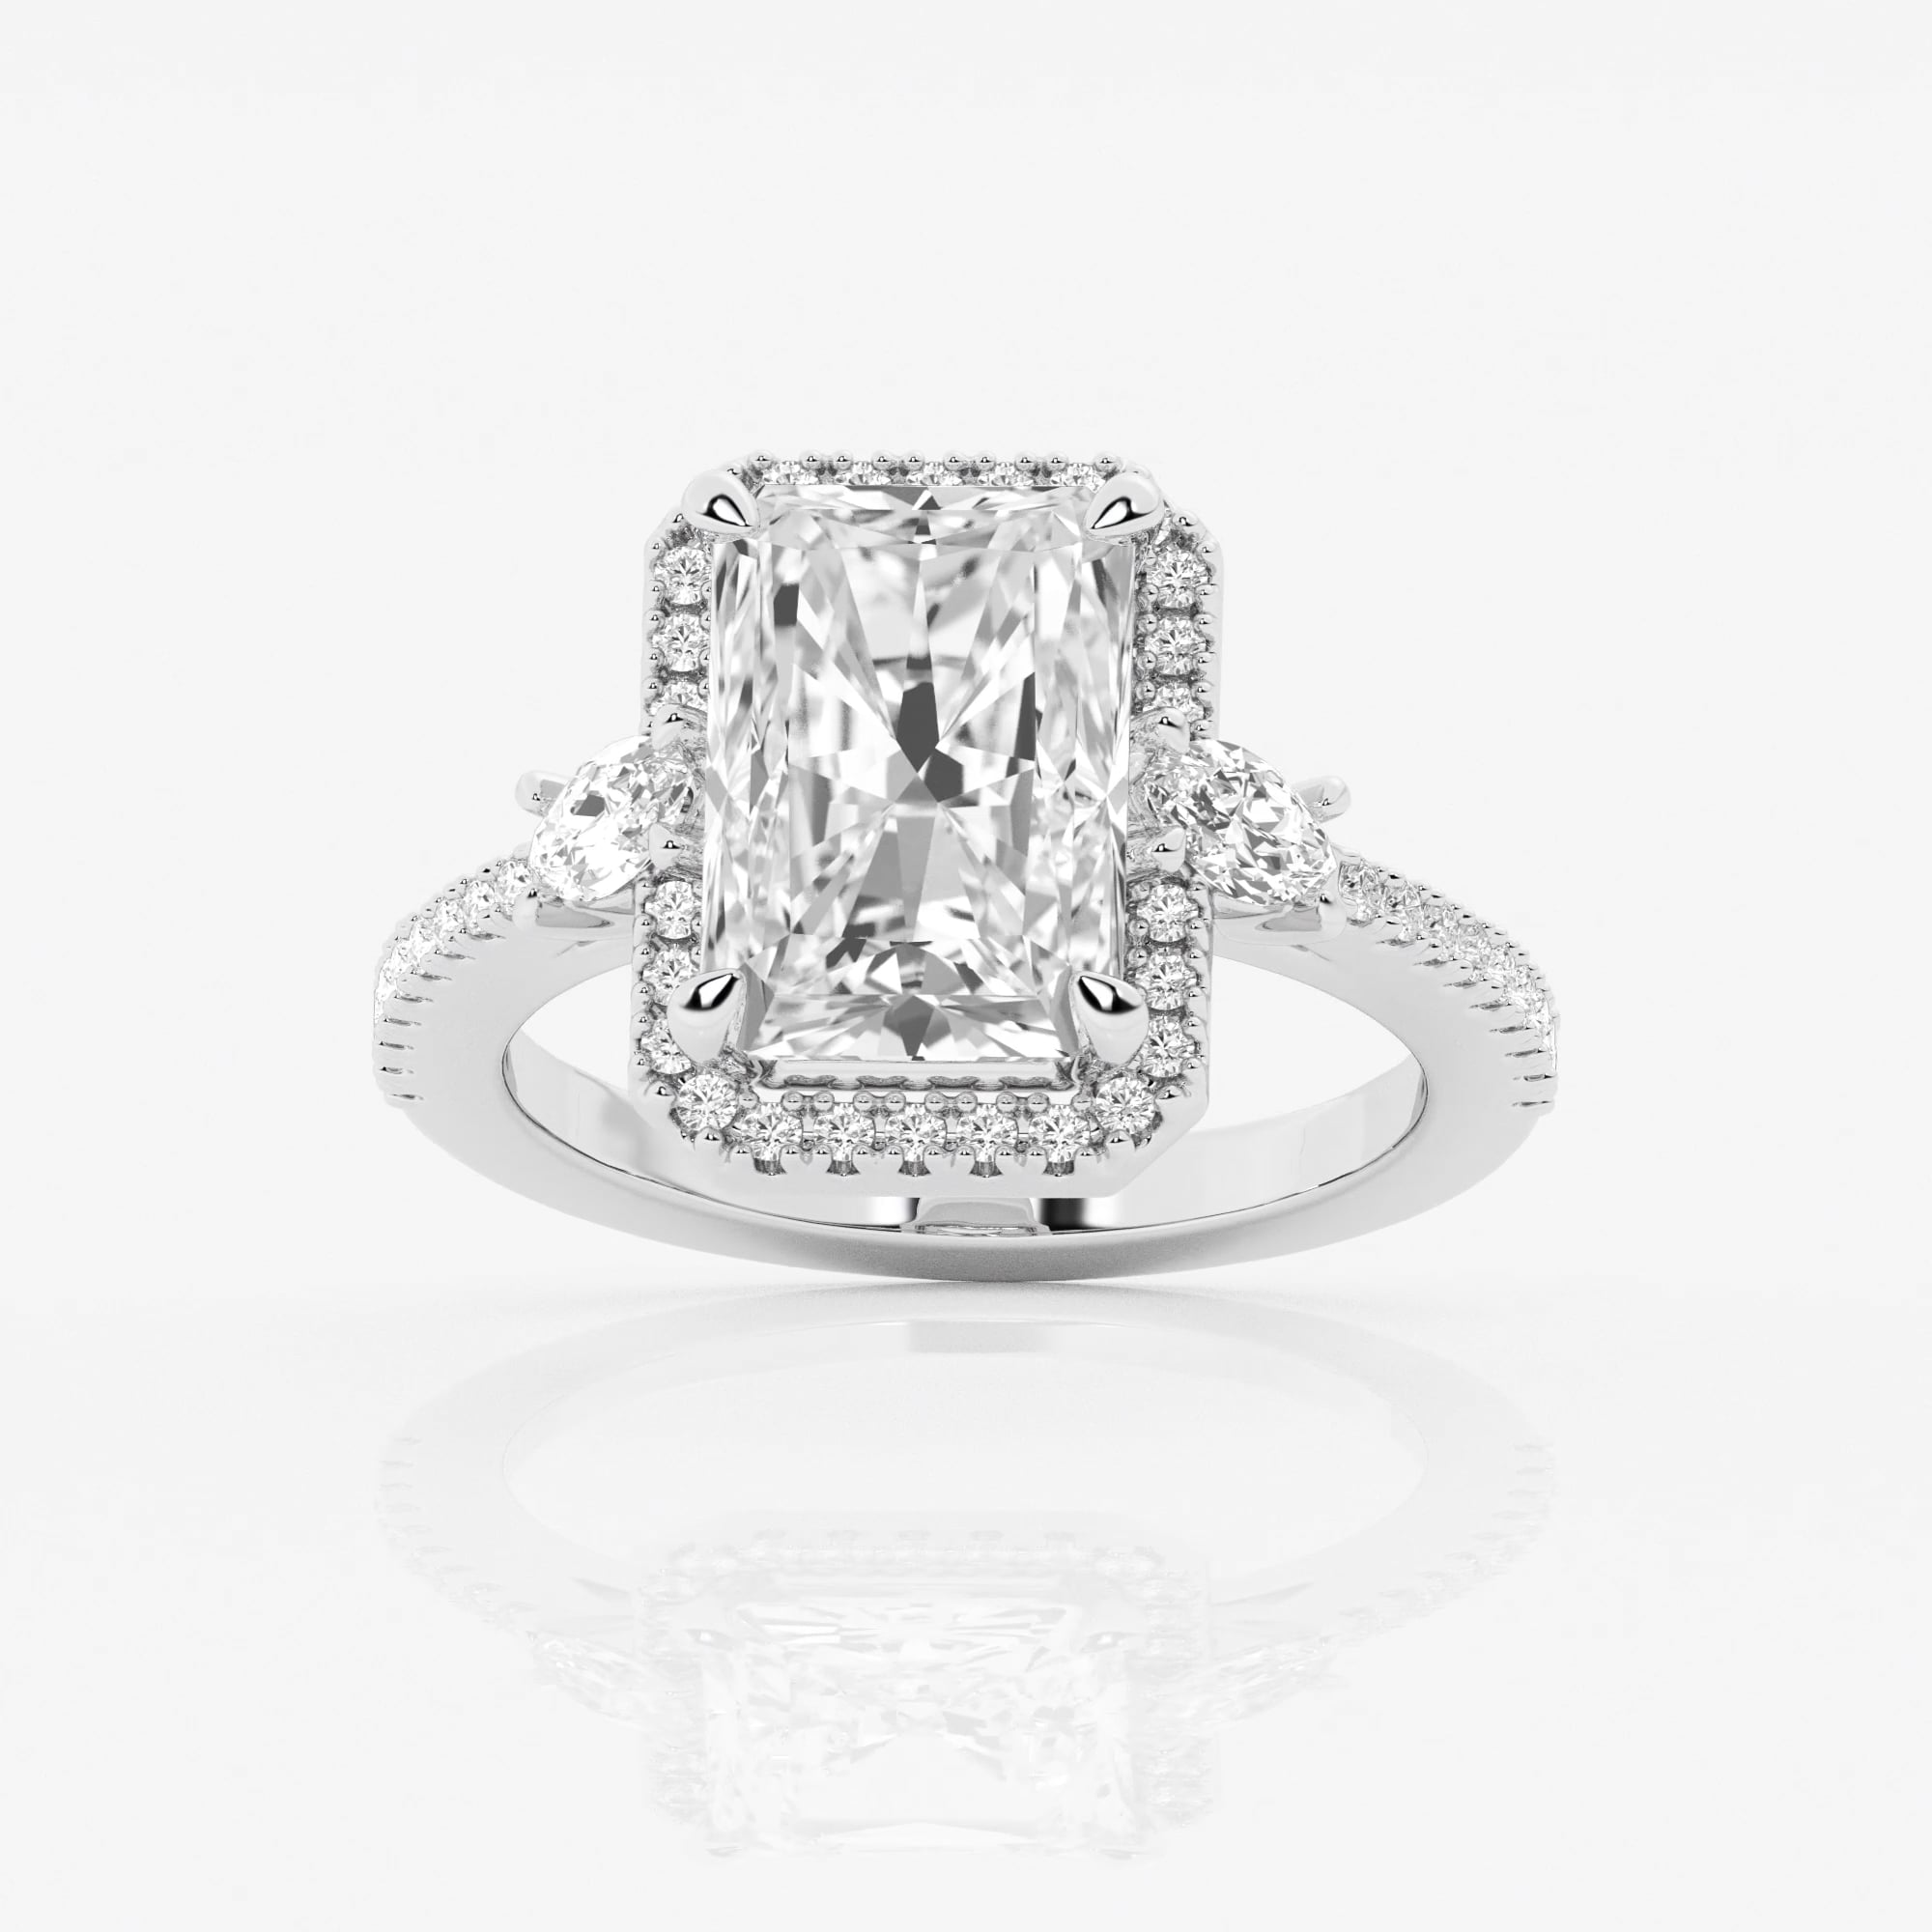 product video for Badgley Mischka Colorless 4 7/8 ctw Radiant Lab Grown Diamond Halo Engagement Ring